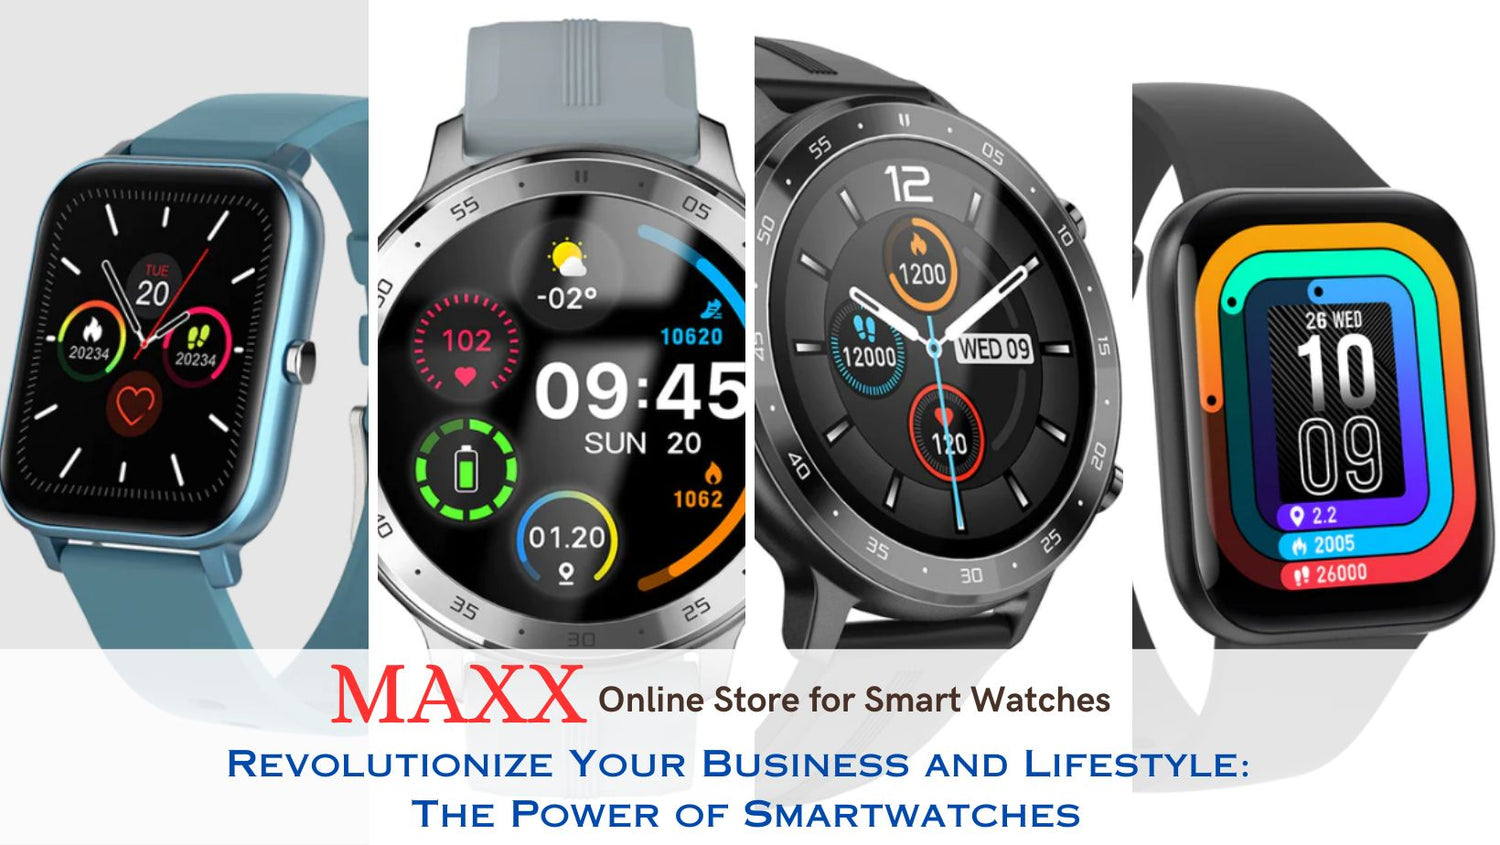 Revolutionize Your Business and Lifestyle: The Power of Smartwatches